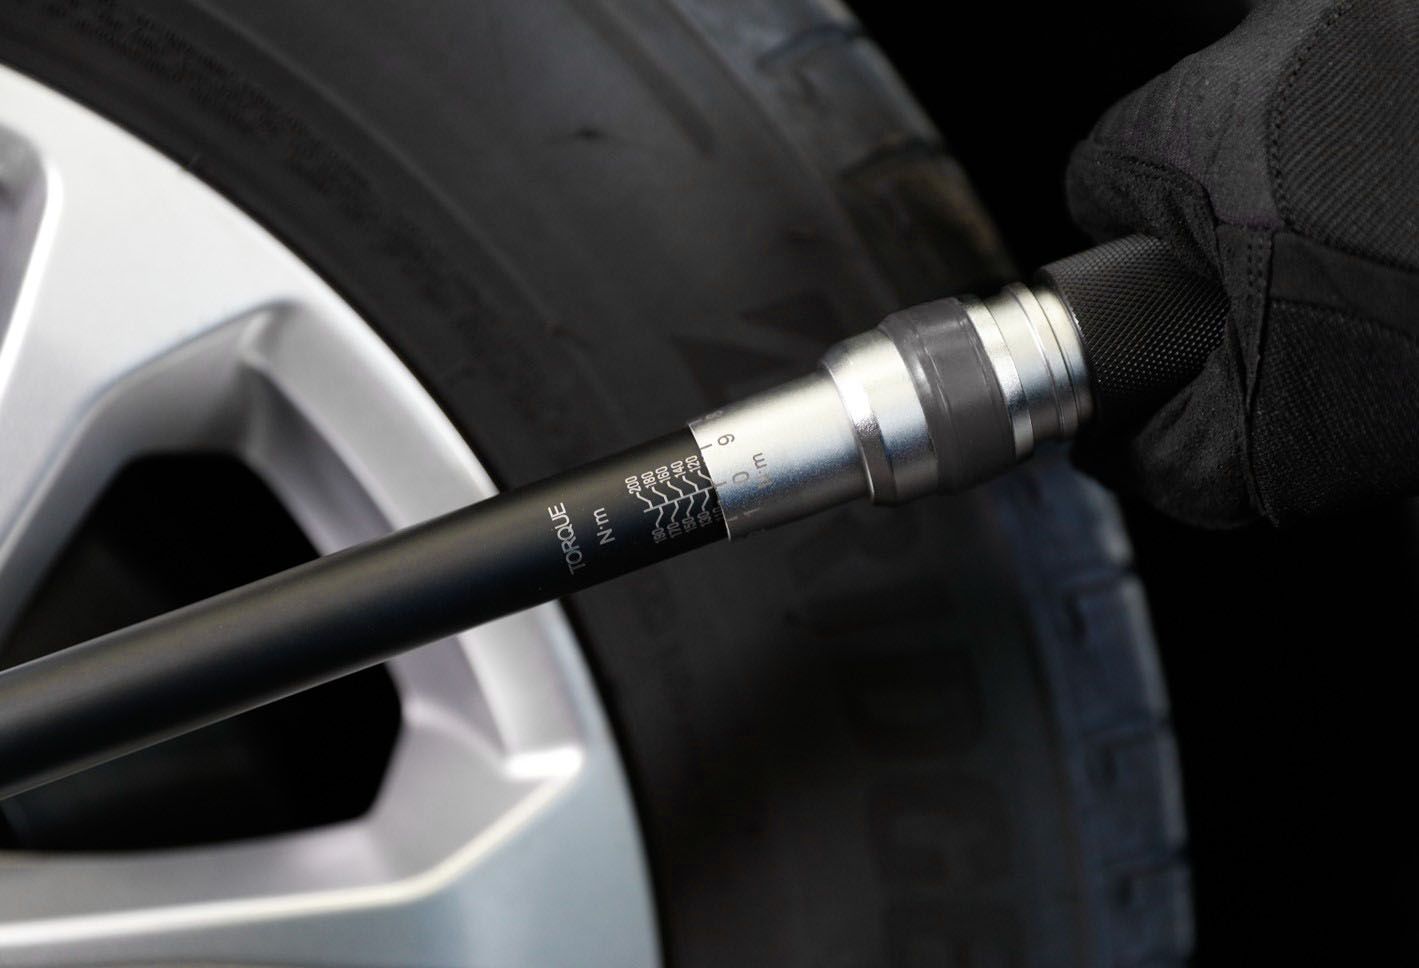 How to use a torque wrench